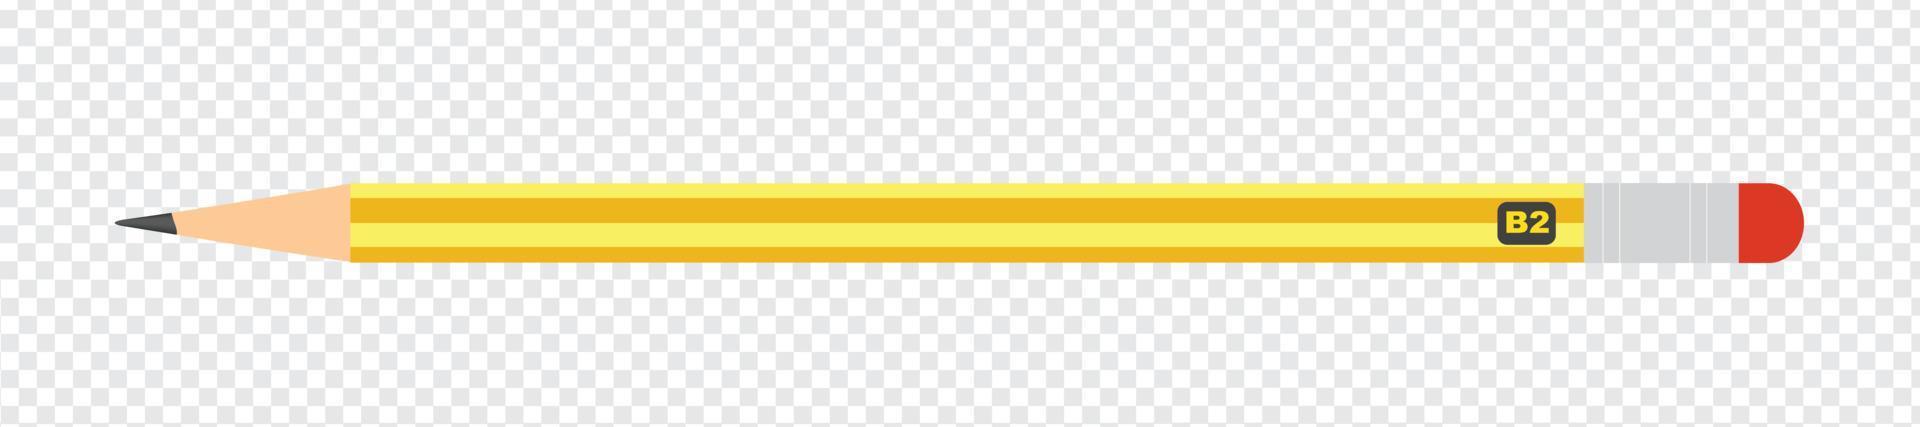 Yellow pencil in realistic style for various websites vector